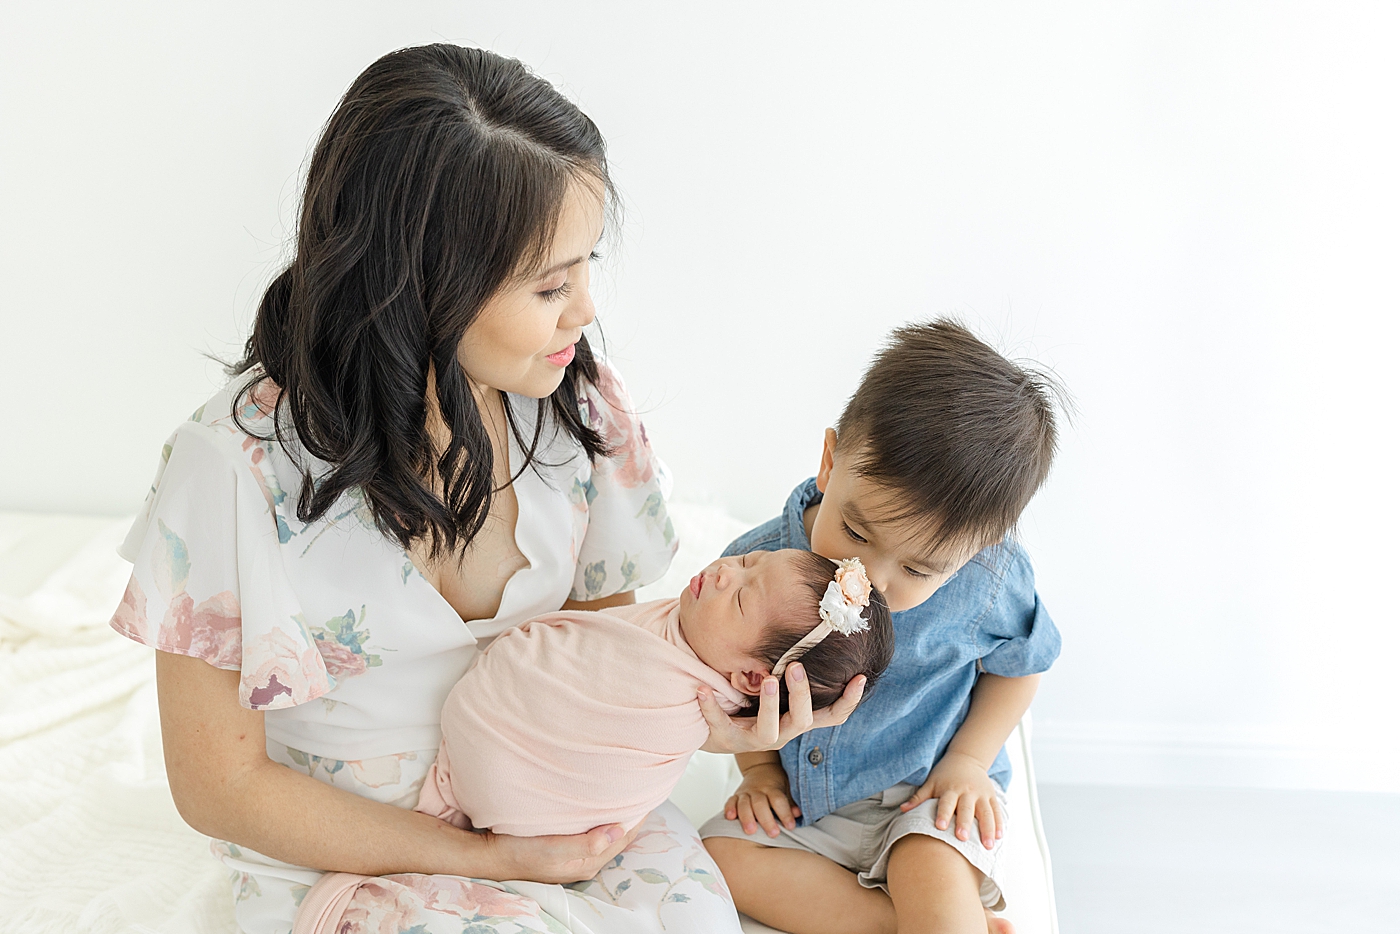 Mom and baby brother holding their new baby during her Newborn sessions with siblings | Image by Sana Ahmed